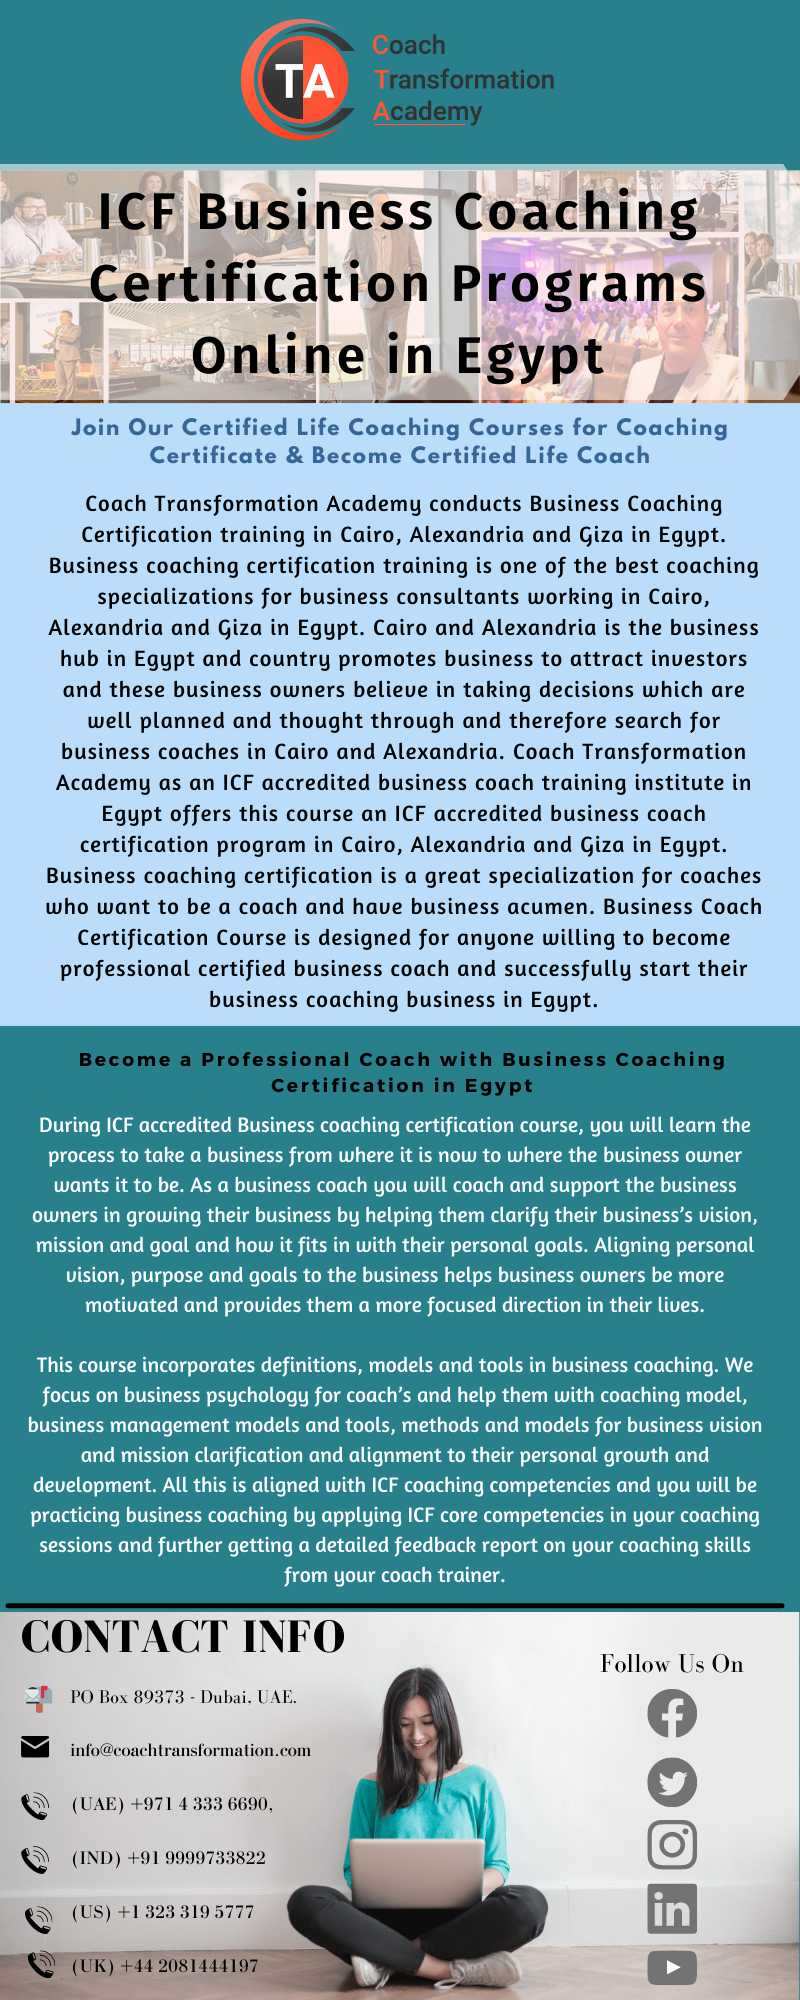 Professional Coach with Business Coaching Certification in Egypt